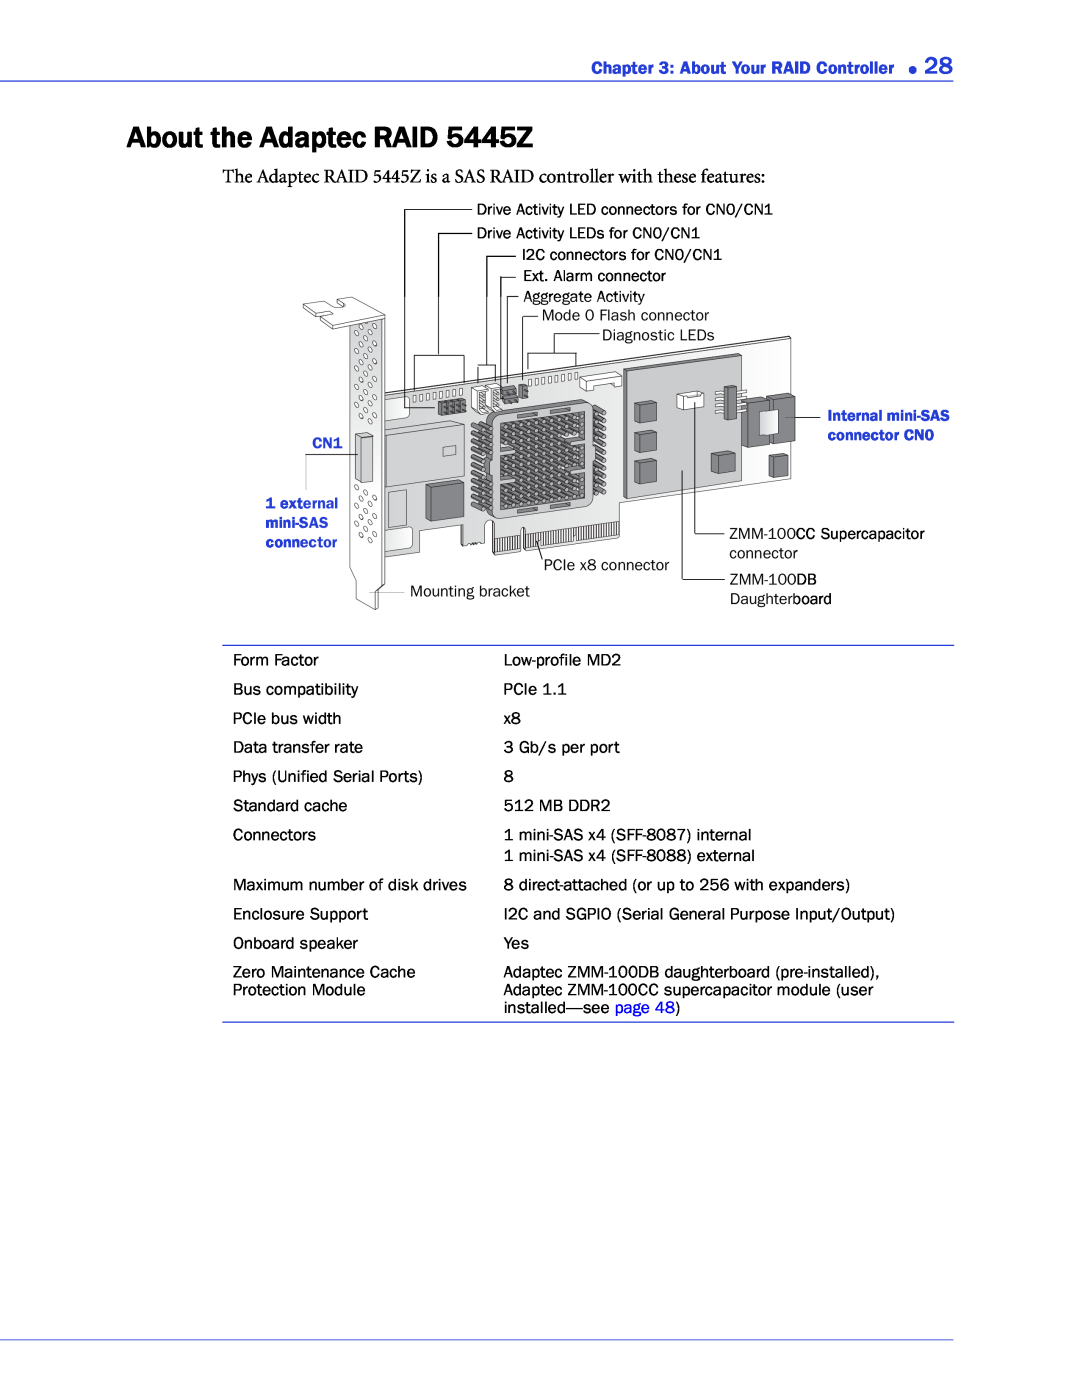 Adaptec 2268300R manual About the Adaptec RAID 5445Z, The Adaptec RAID 5445Z is a SAS RAID controller with these features 